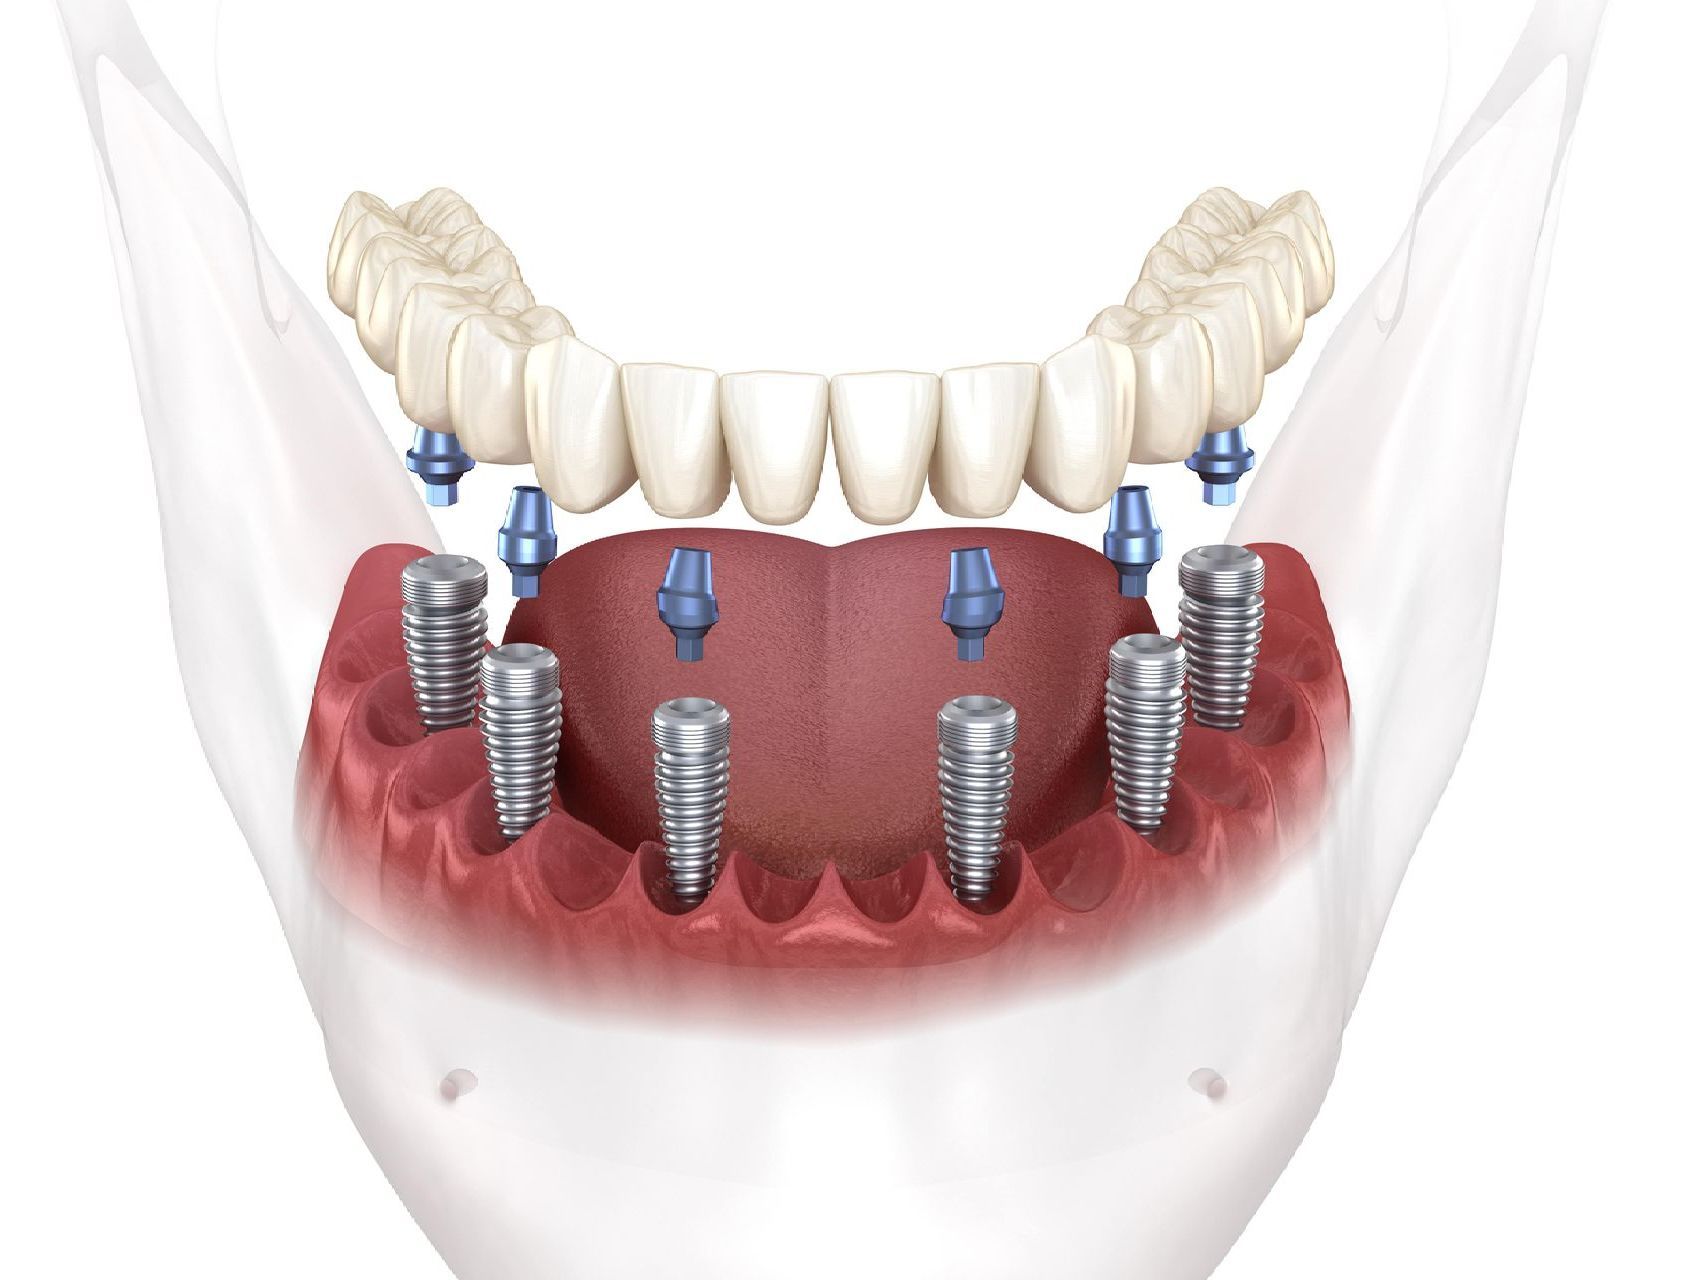 A computer generated image of all-on-6 implants and a full arch tooth replacement